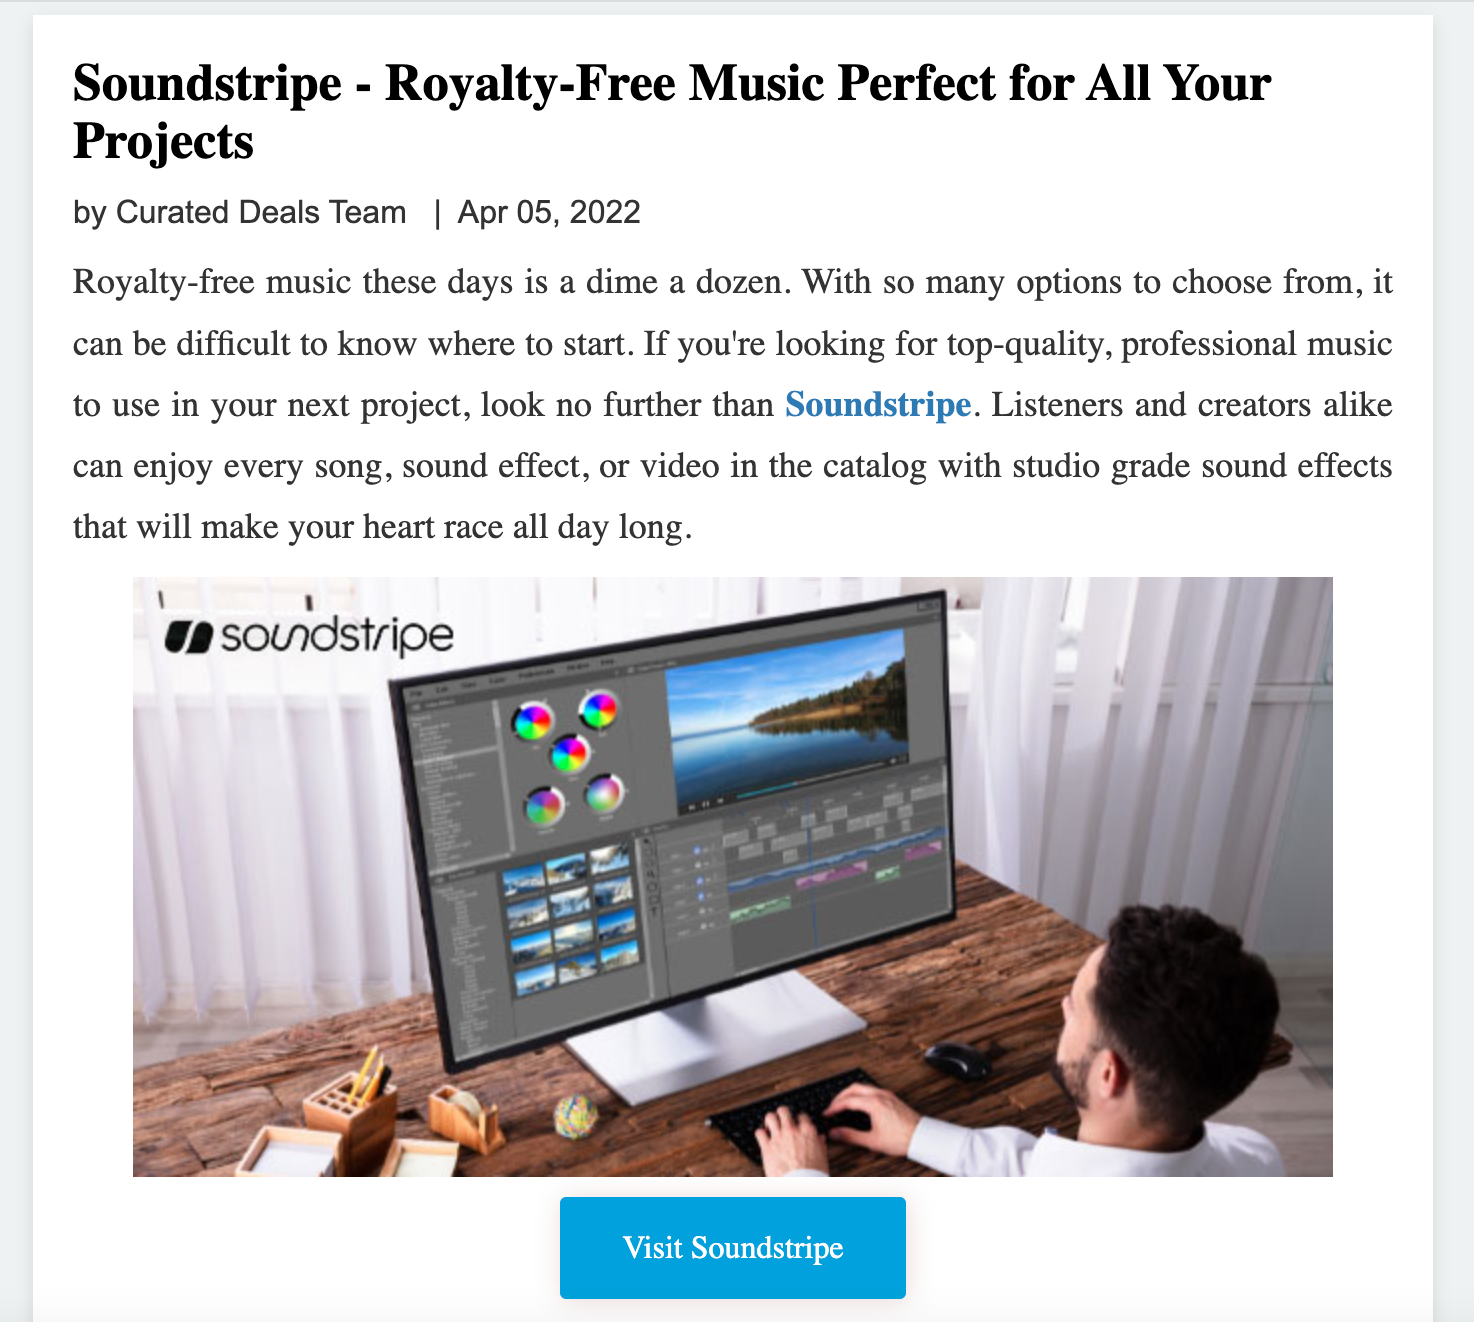 Soundstripe review from Curated Deals